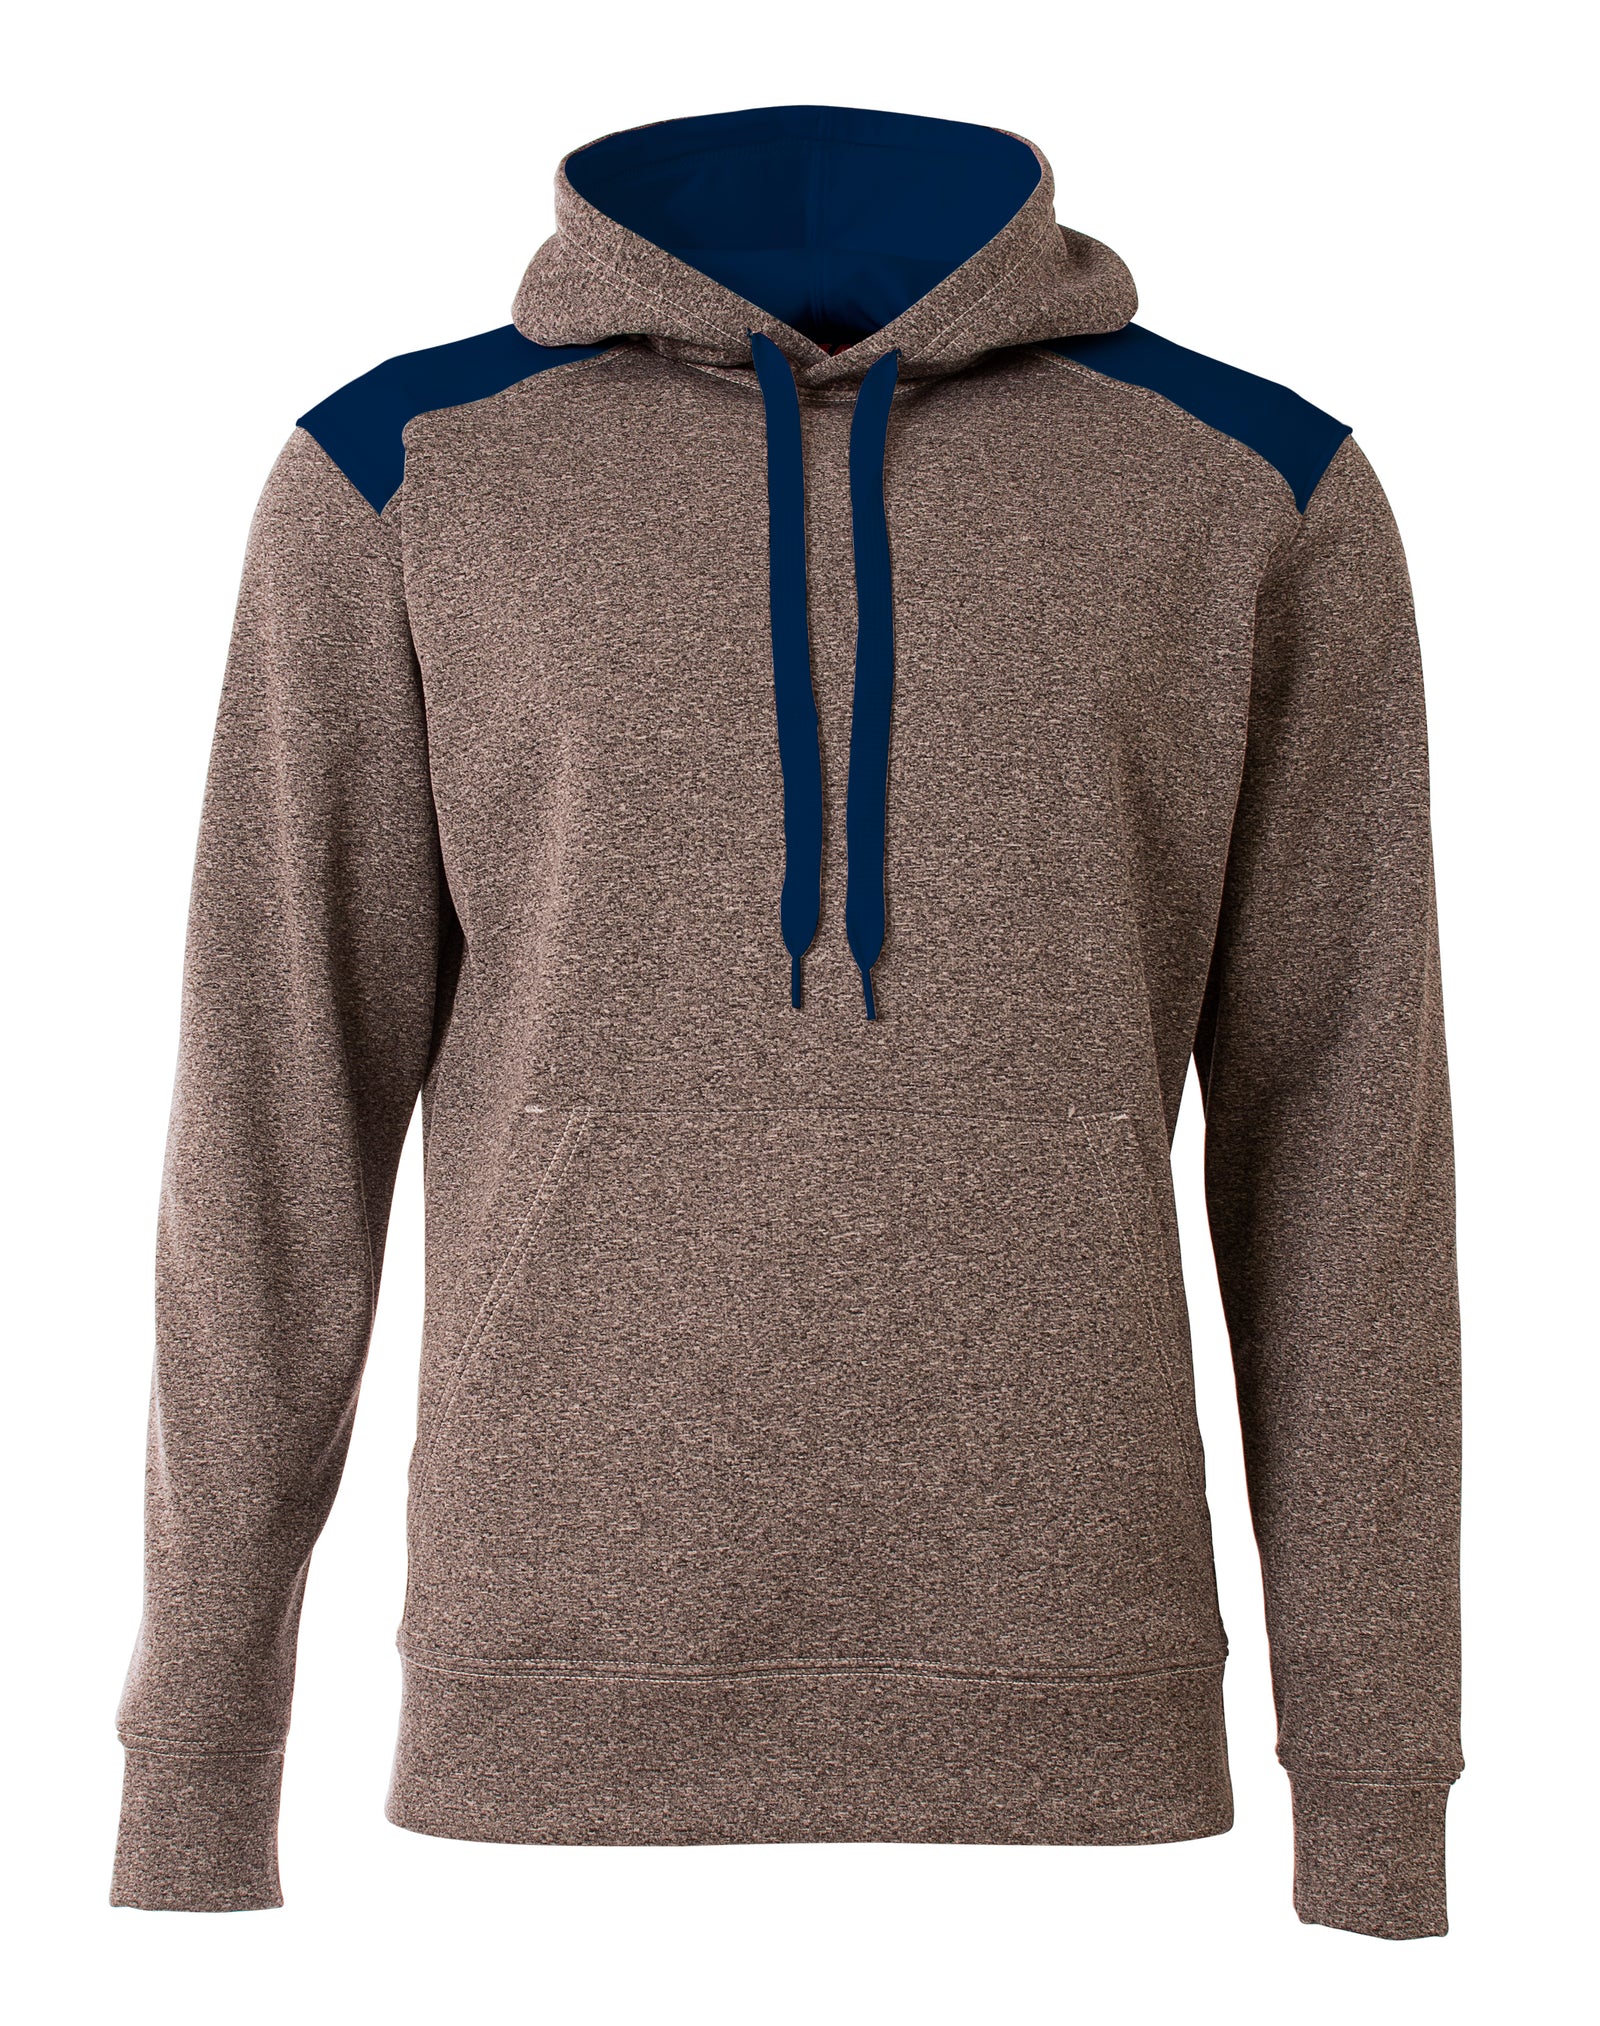 Heather/navy A4 A4 Youth Tourney Fleece Hoodie